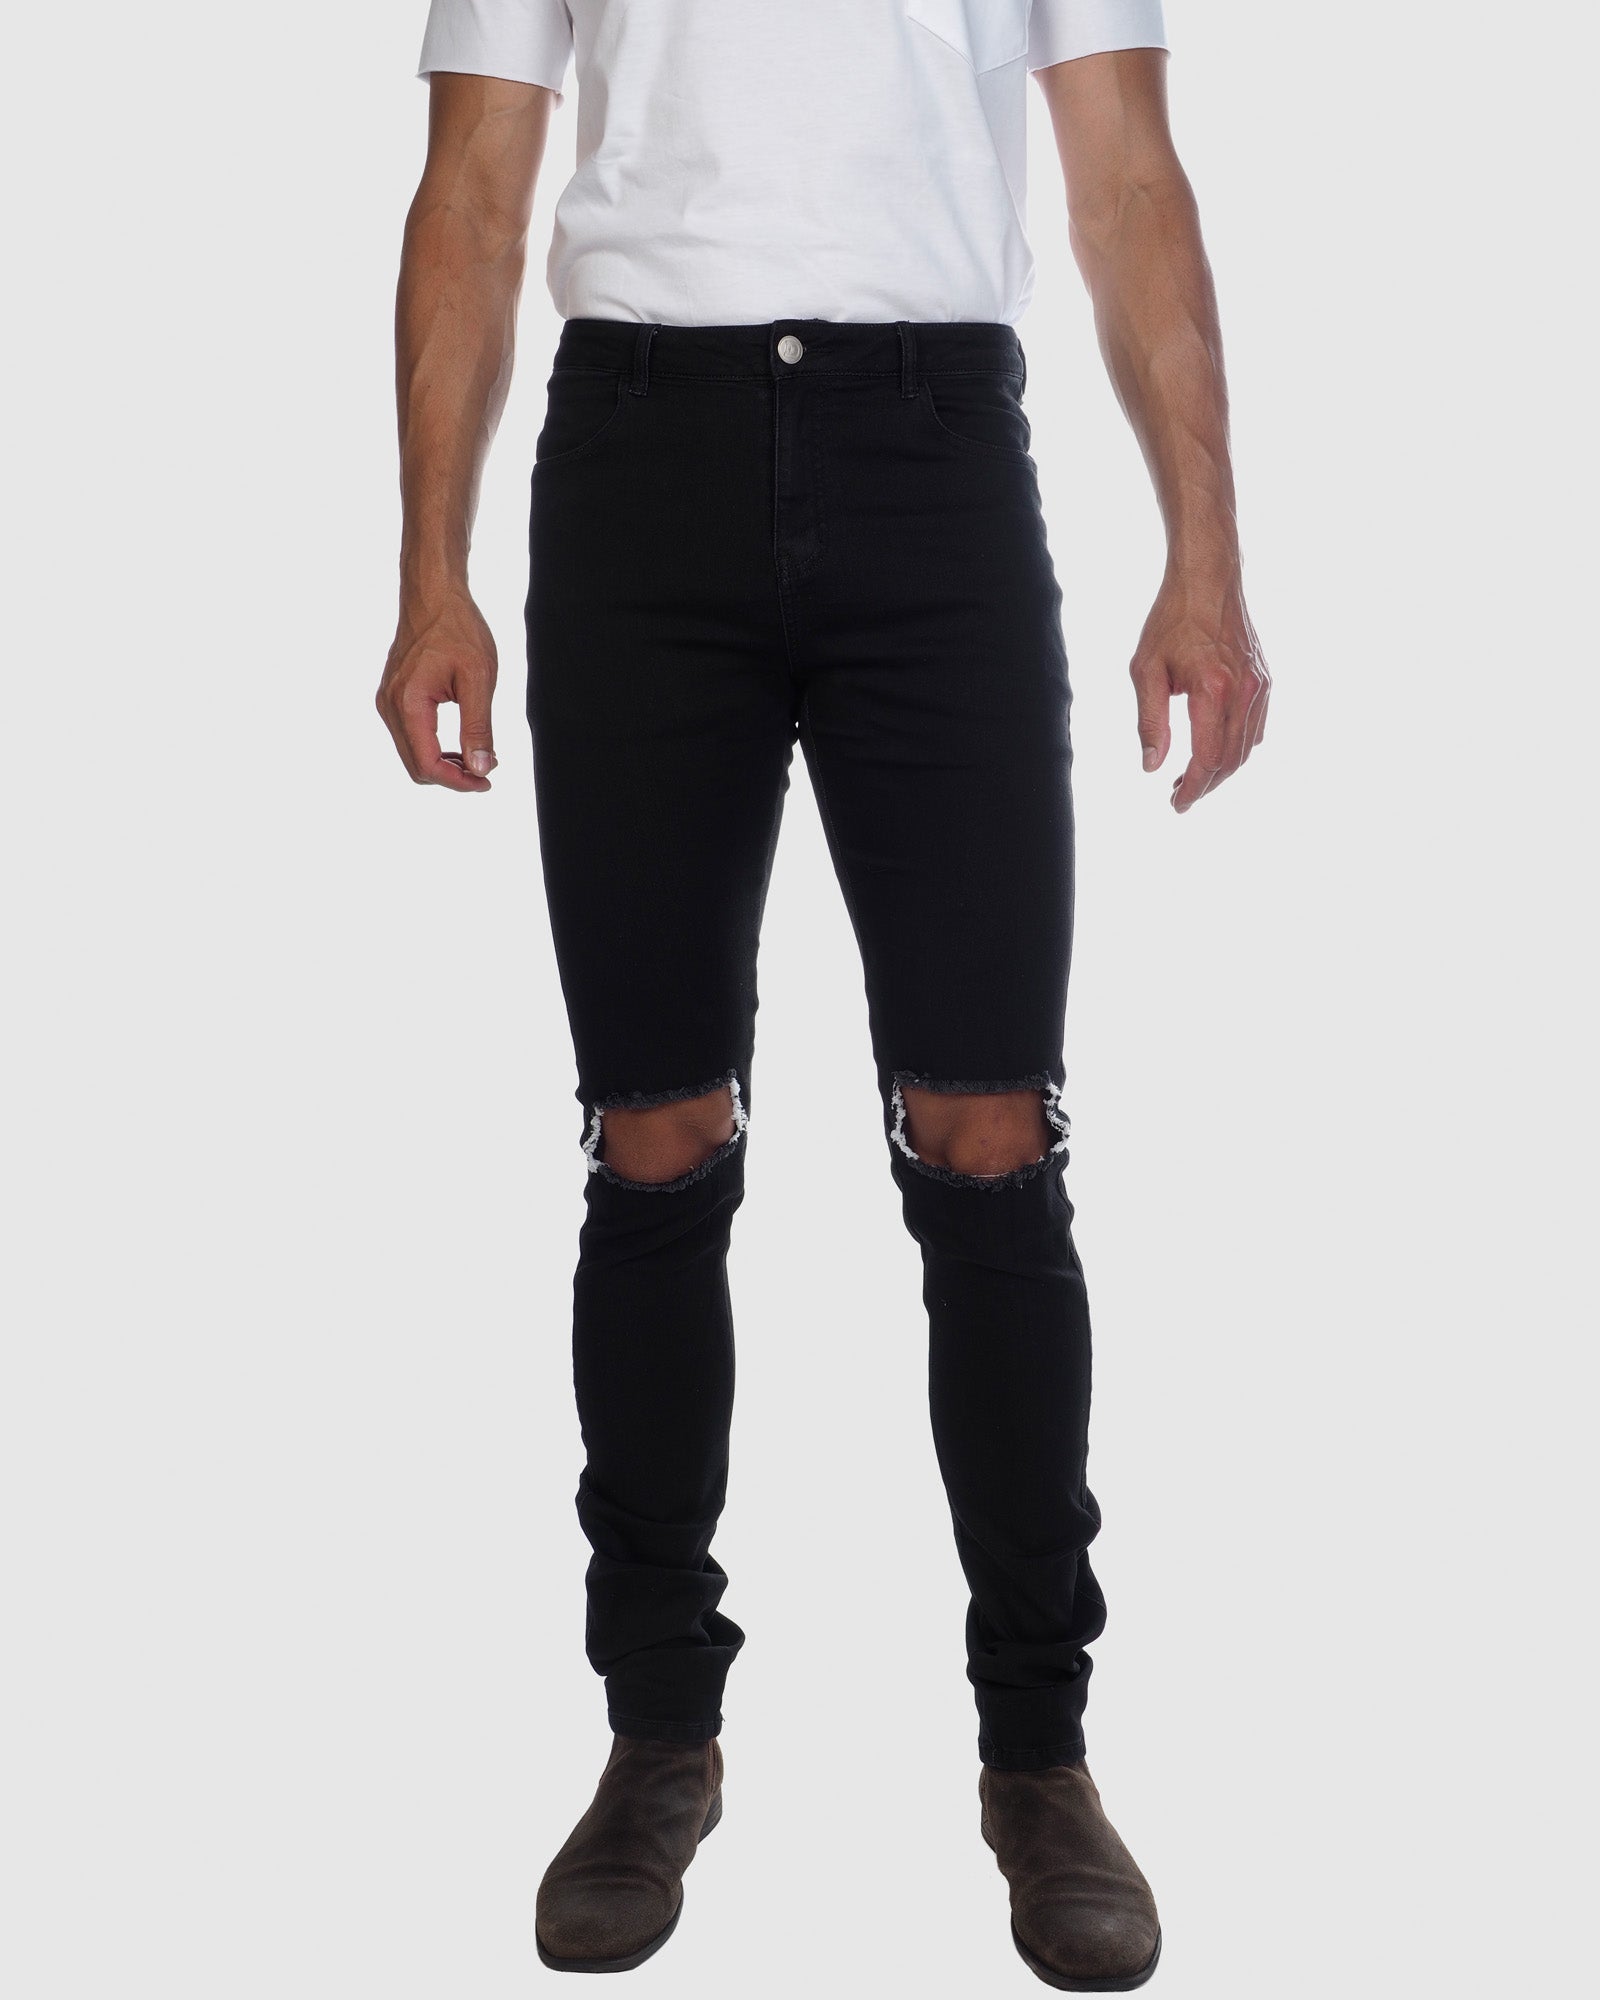 JJ Stretch Jeans - Distressed Black – Doubs Clothing